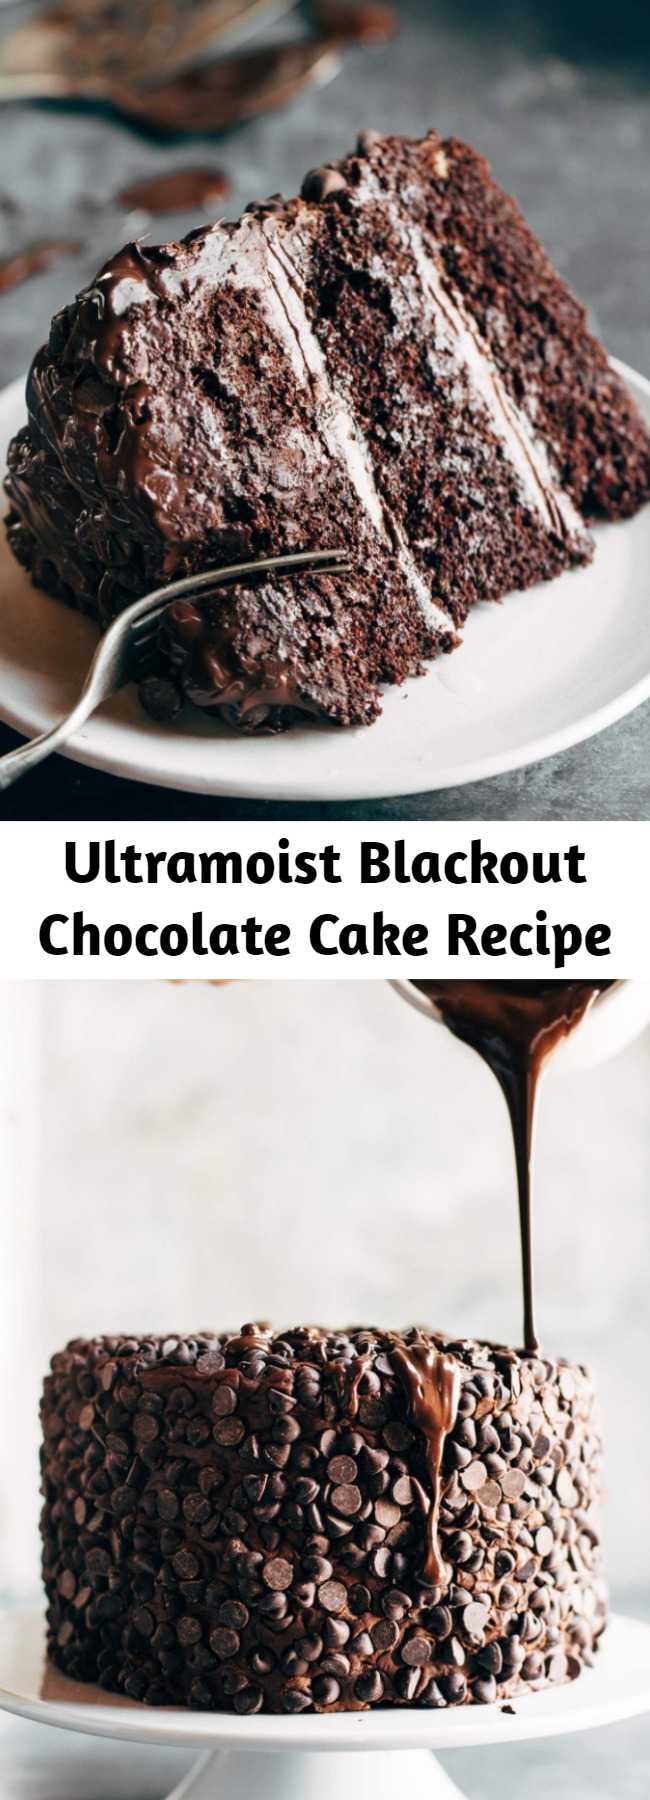 Ultramoist Blackout Chocolate Cake Recipe - This is the cake for chocolate lovers! Ultramoist chocolate cake, layers of cream cheese chocolate frosting, and an awesome chocolate chip + chocolate drizzle exterior.